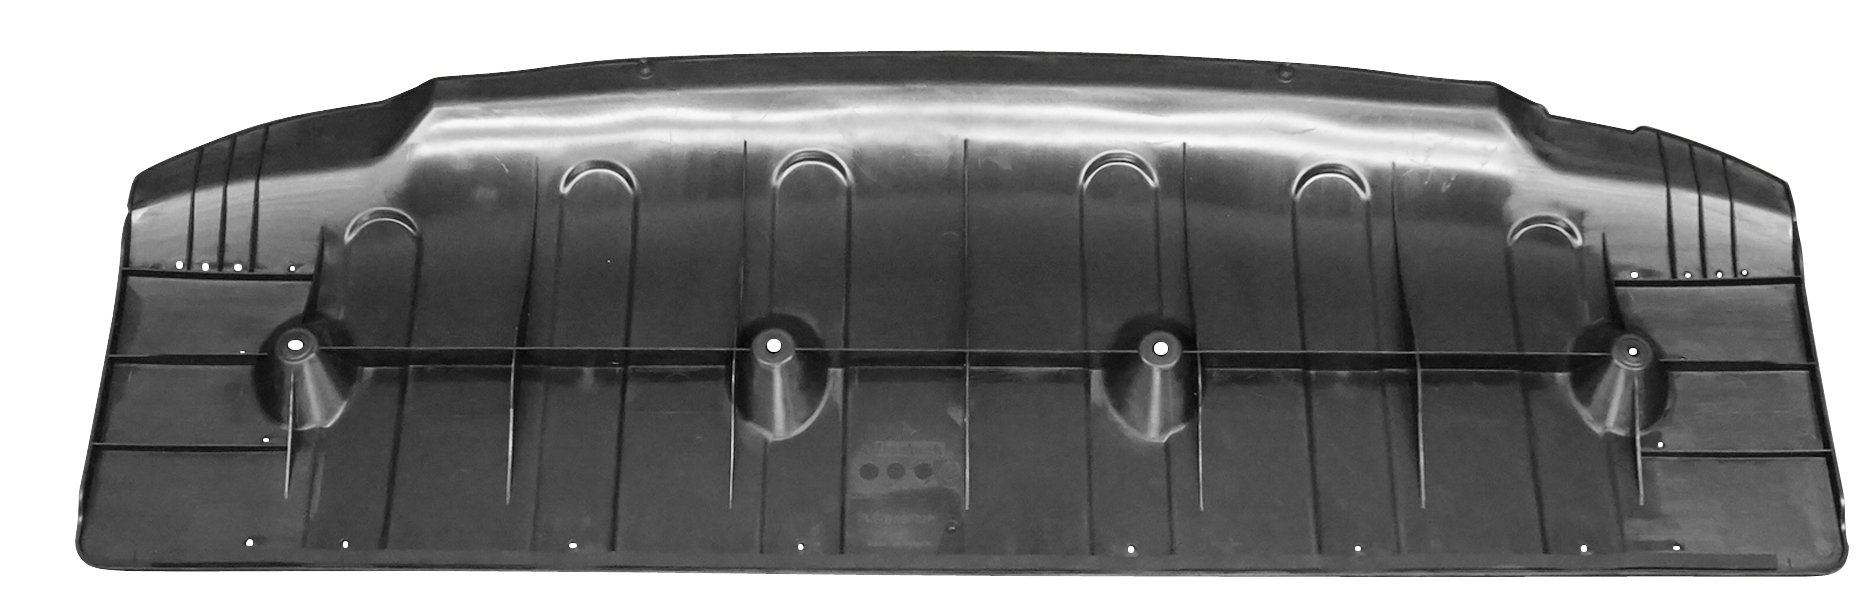 Aftermarket UNDER ENGINE COVERS for KIA - OPTIMA, OPTIMA,14-15,Lower engine cover